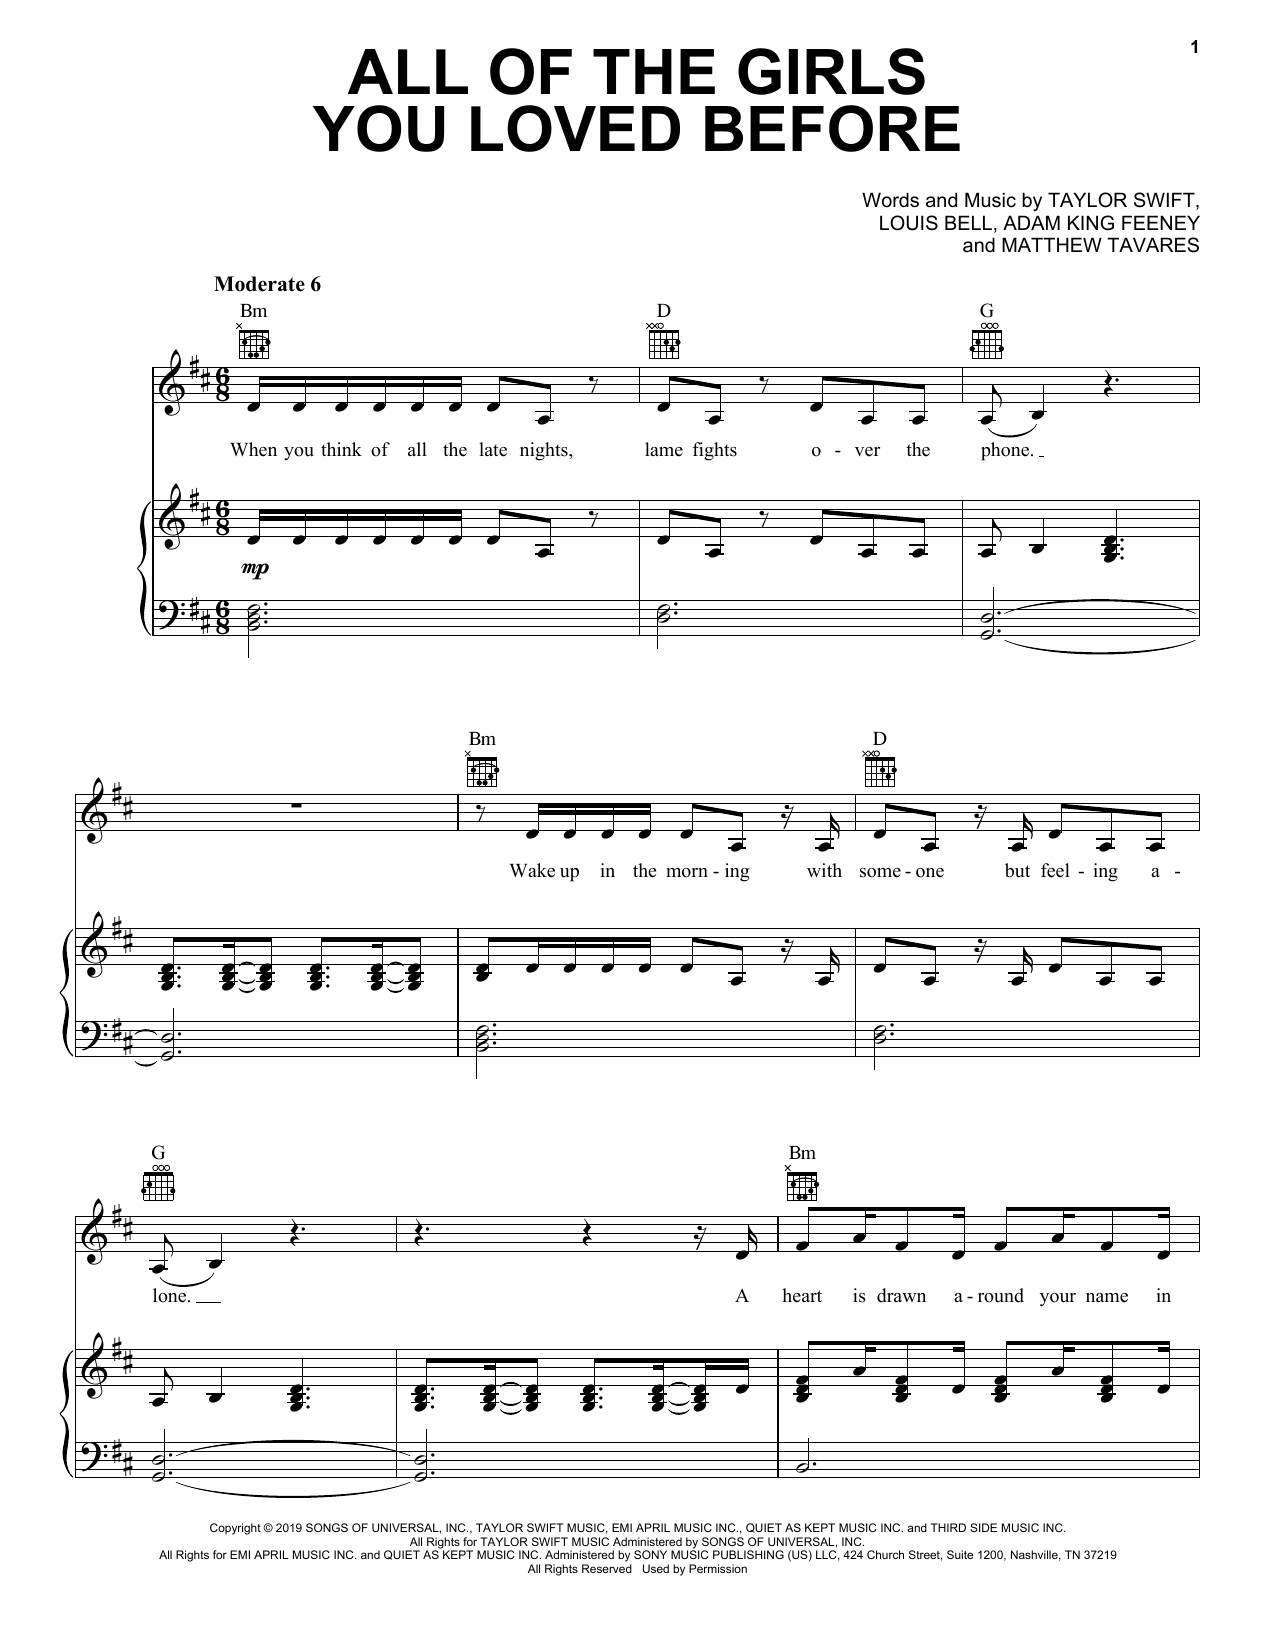 Taylor Swift All Of The Girls You Loved Before sheet music notes and chords. Download Printable PDF.